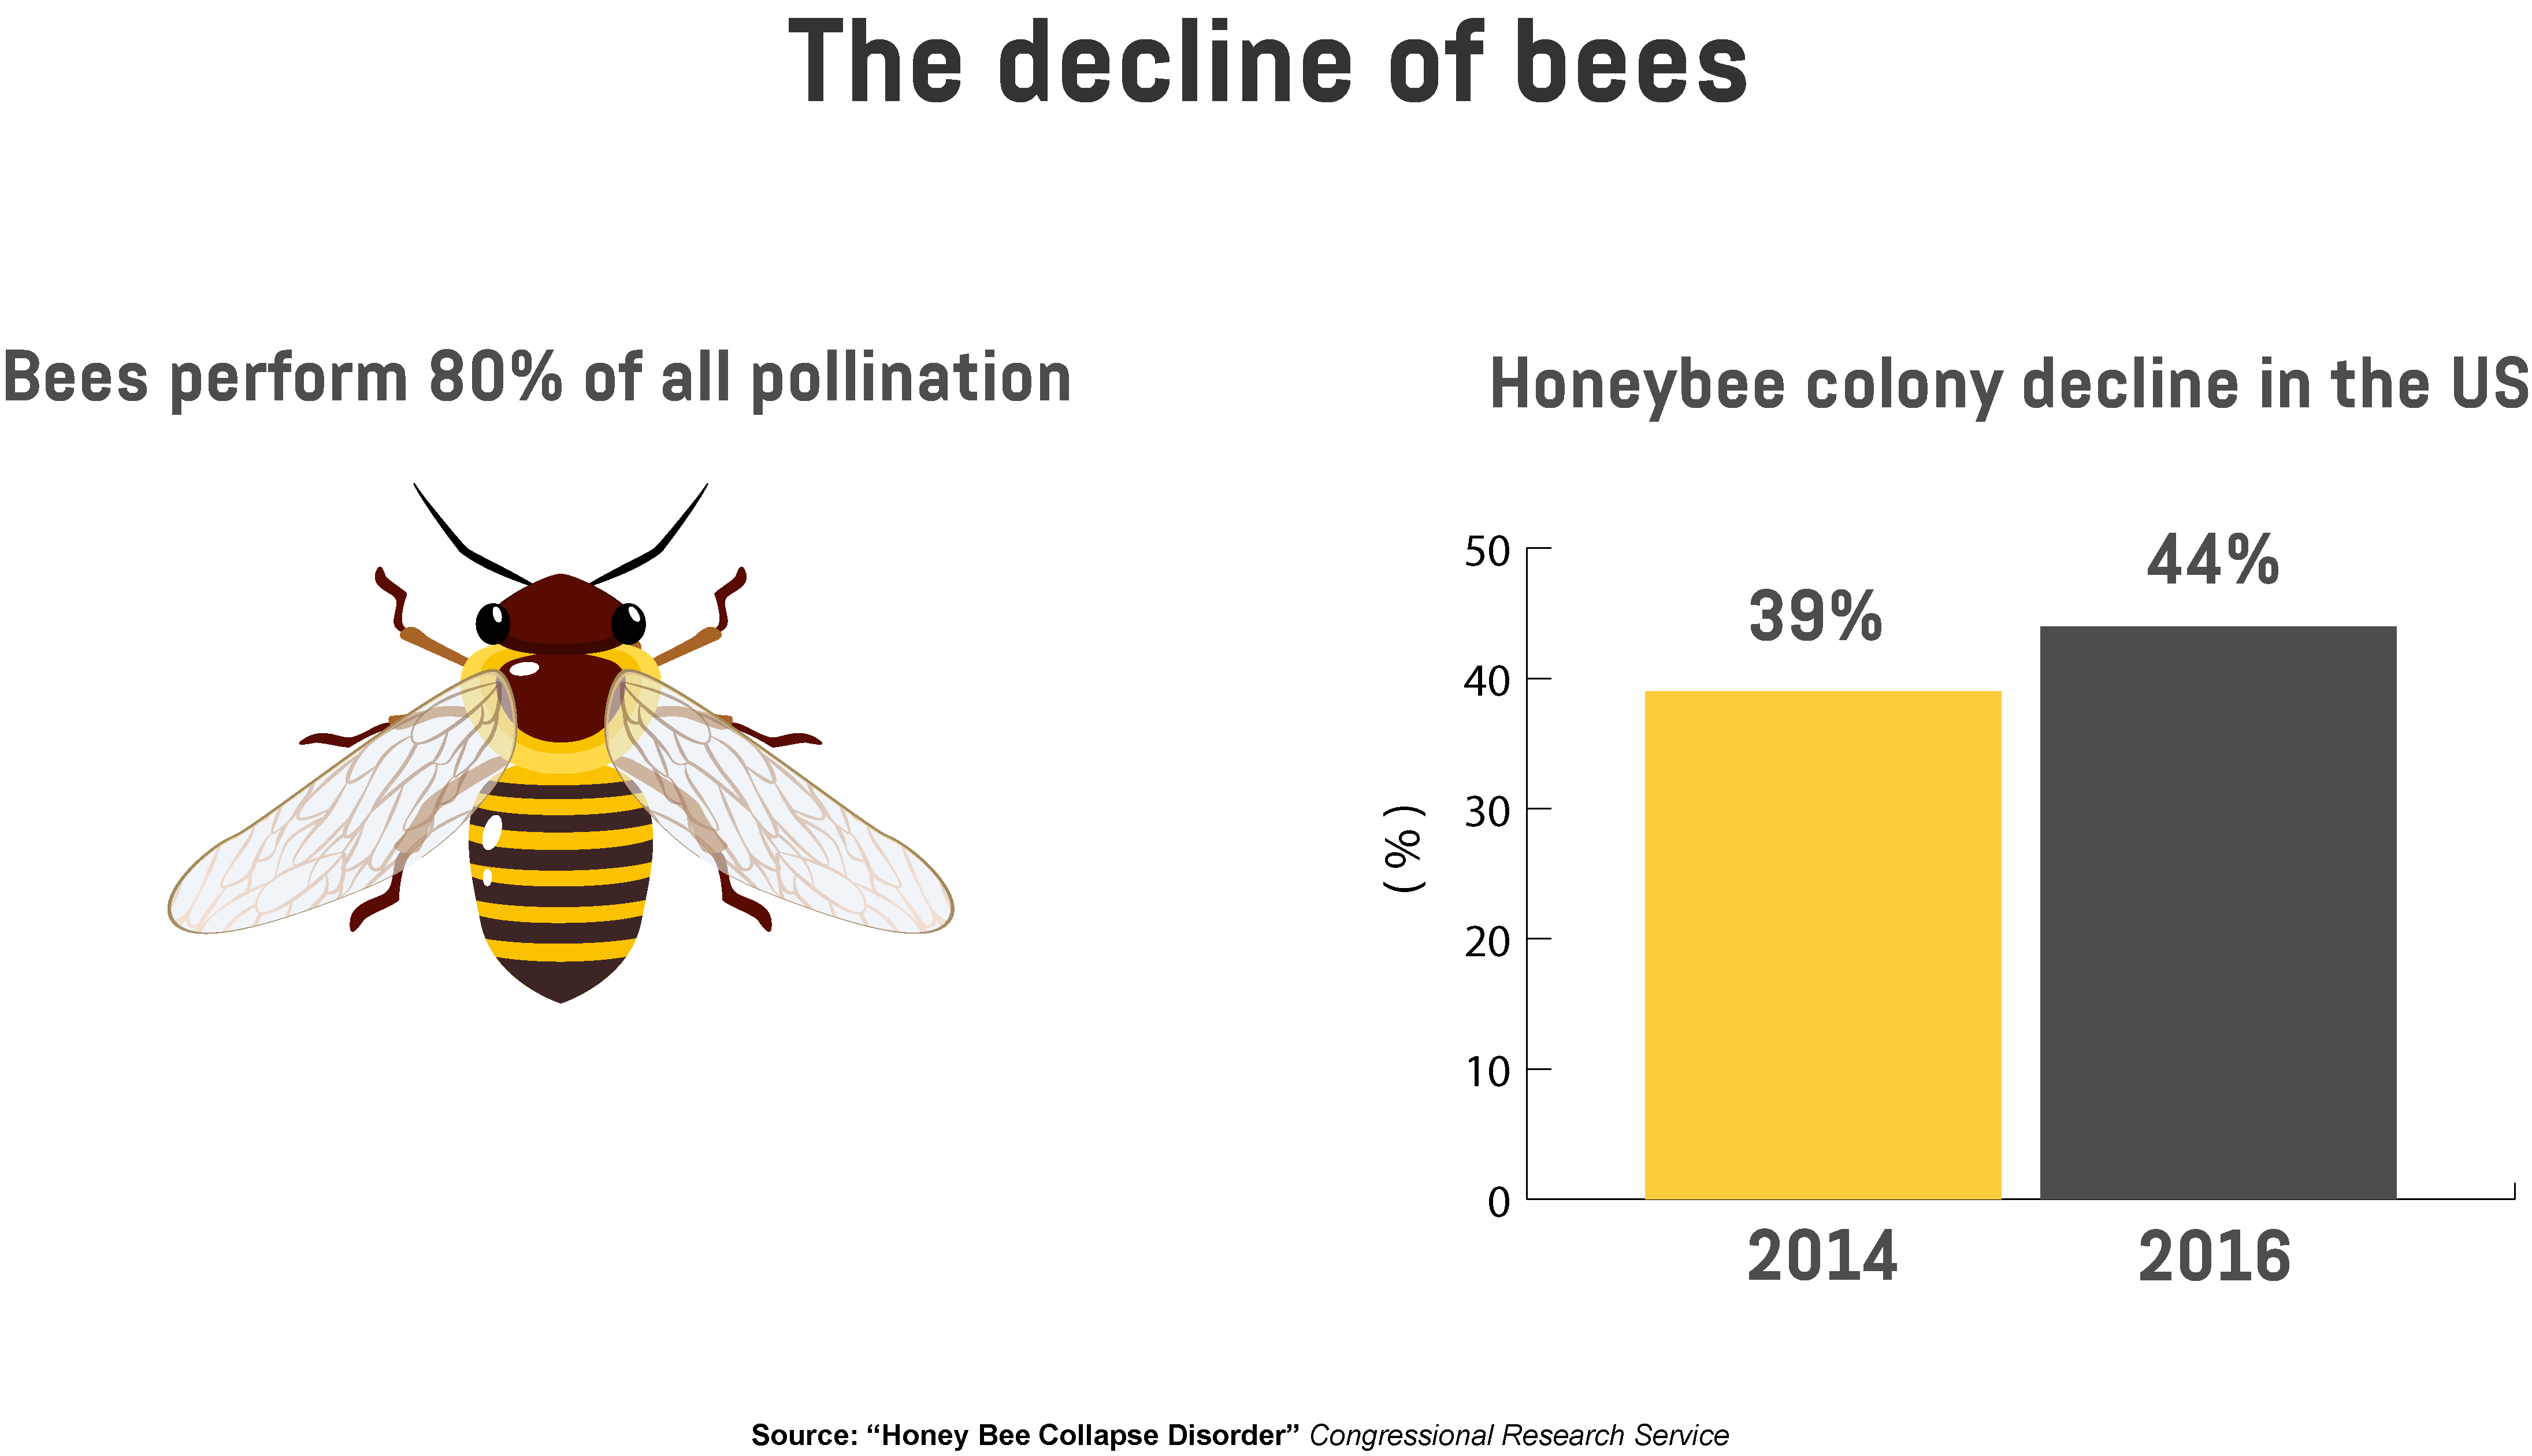 An infographic showing the percentage of pollination conducted by bees and the decline of honeybee colonies in the US for 2014 and 2016.